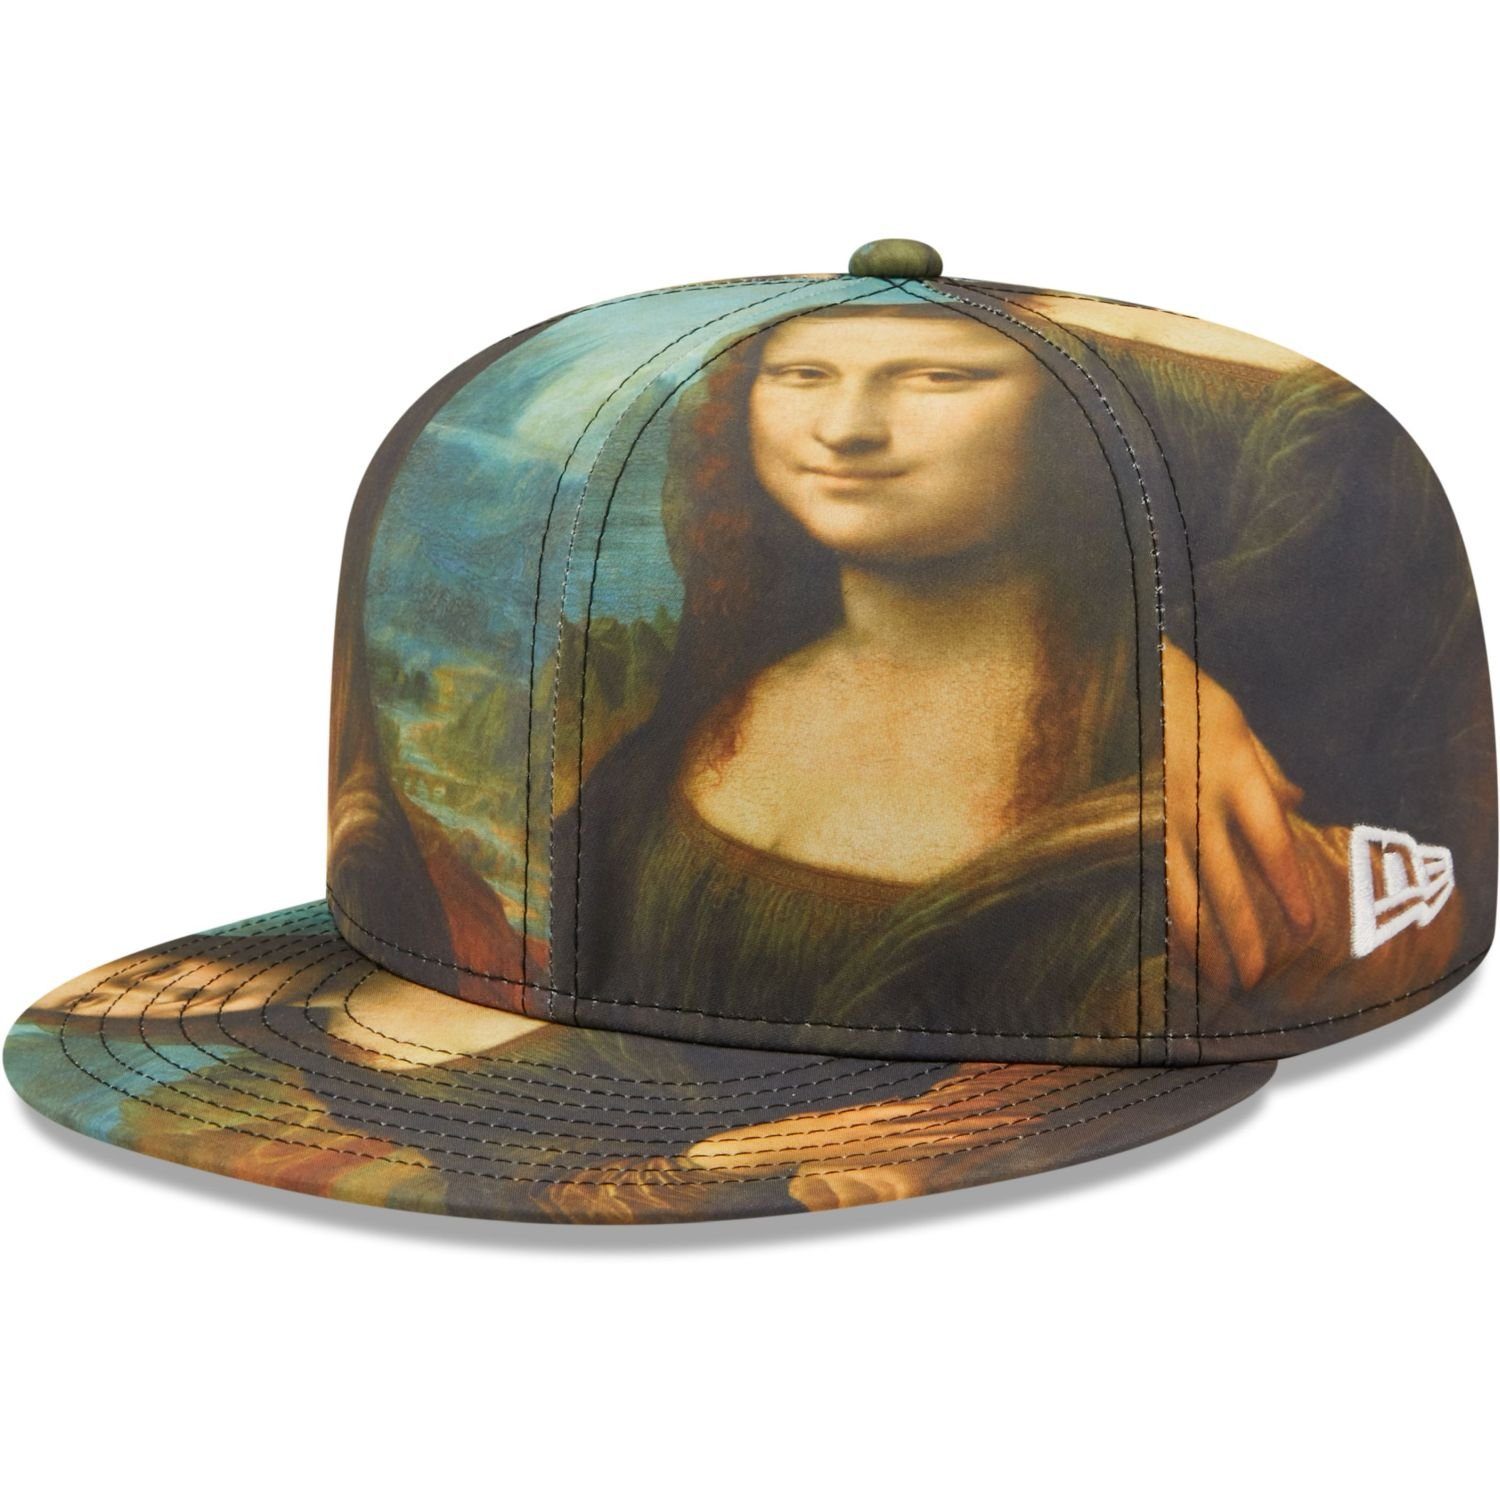 New Cap Fitted LE Mona Era Lisa LOUVRE 59Fifty